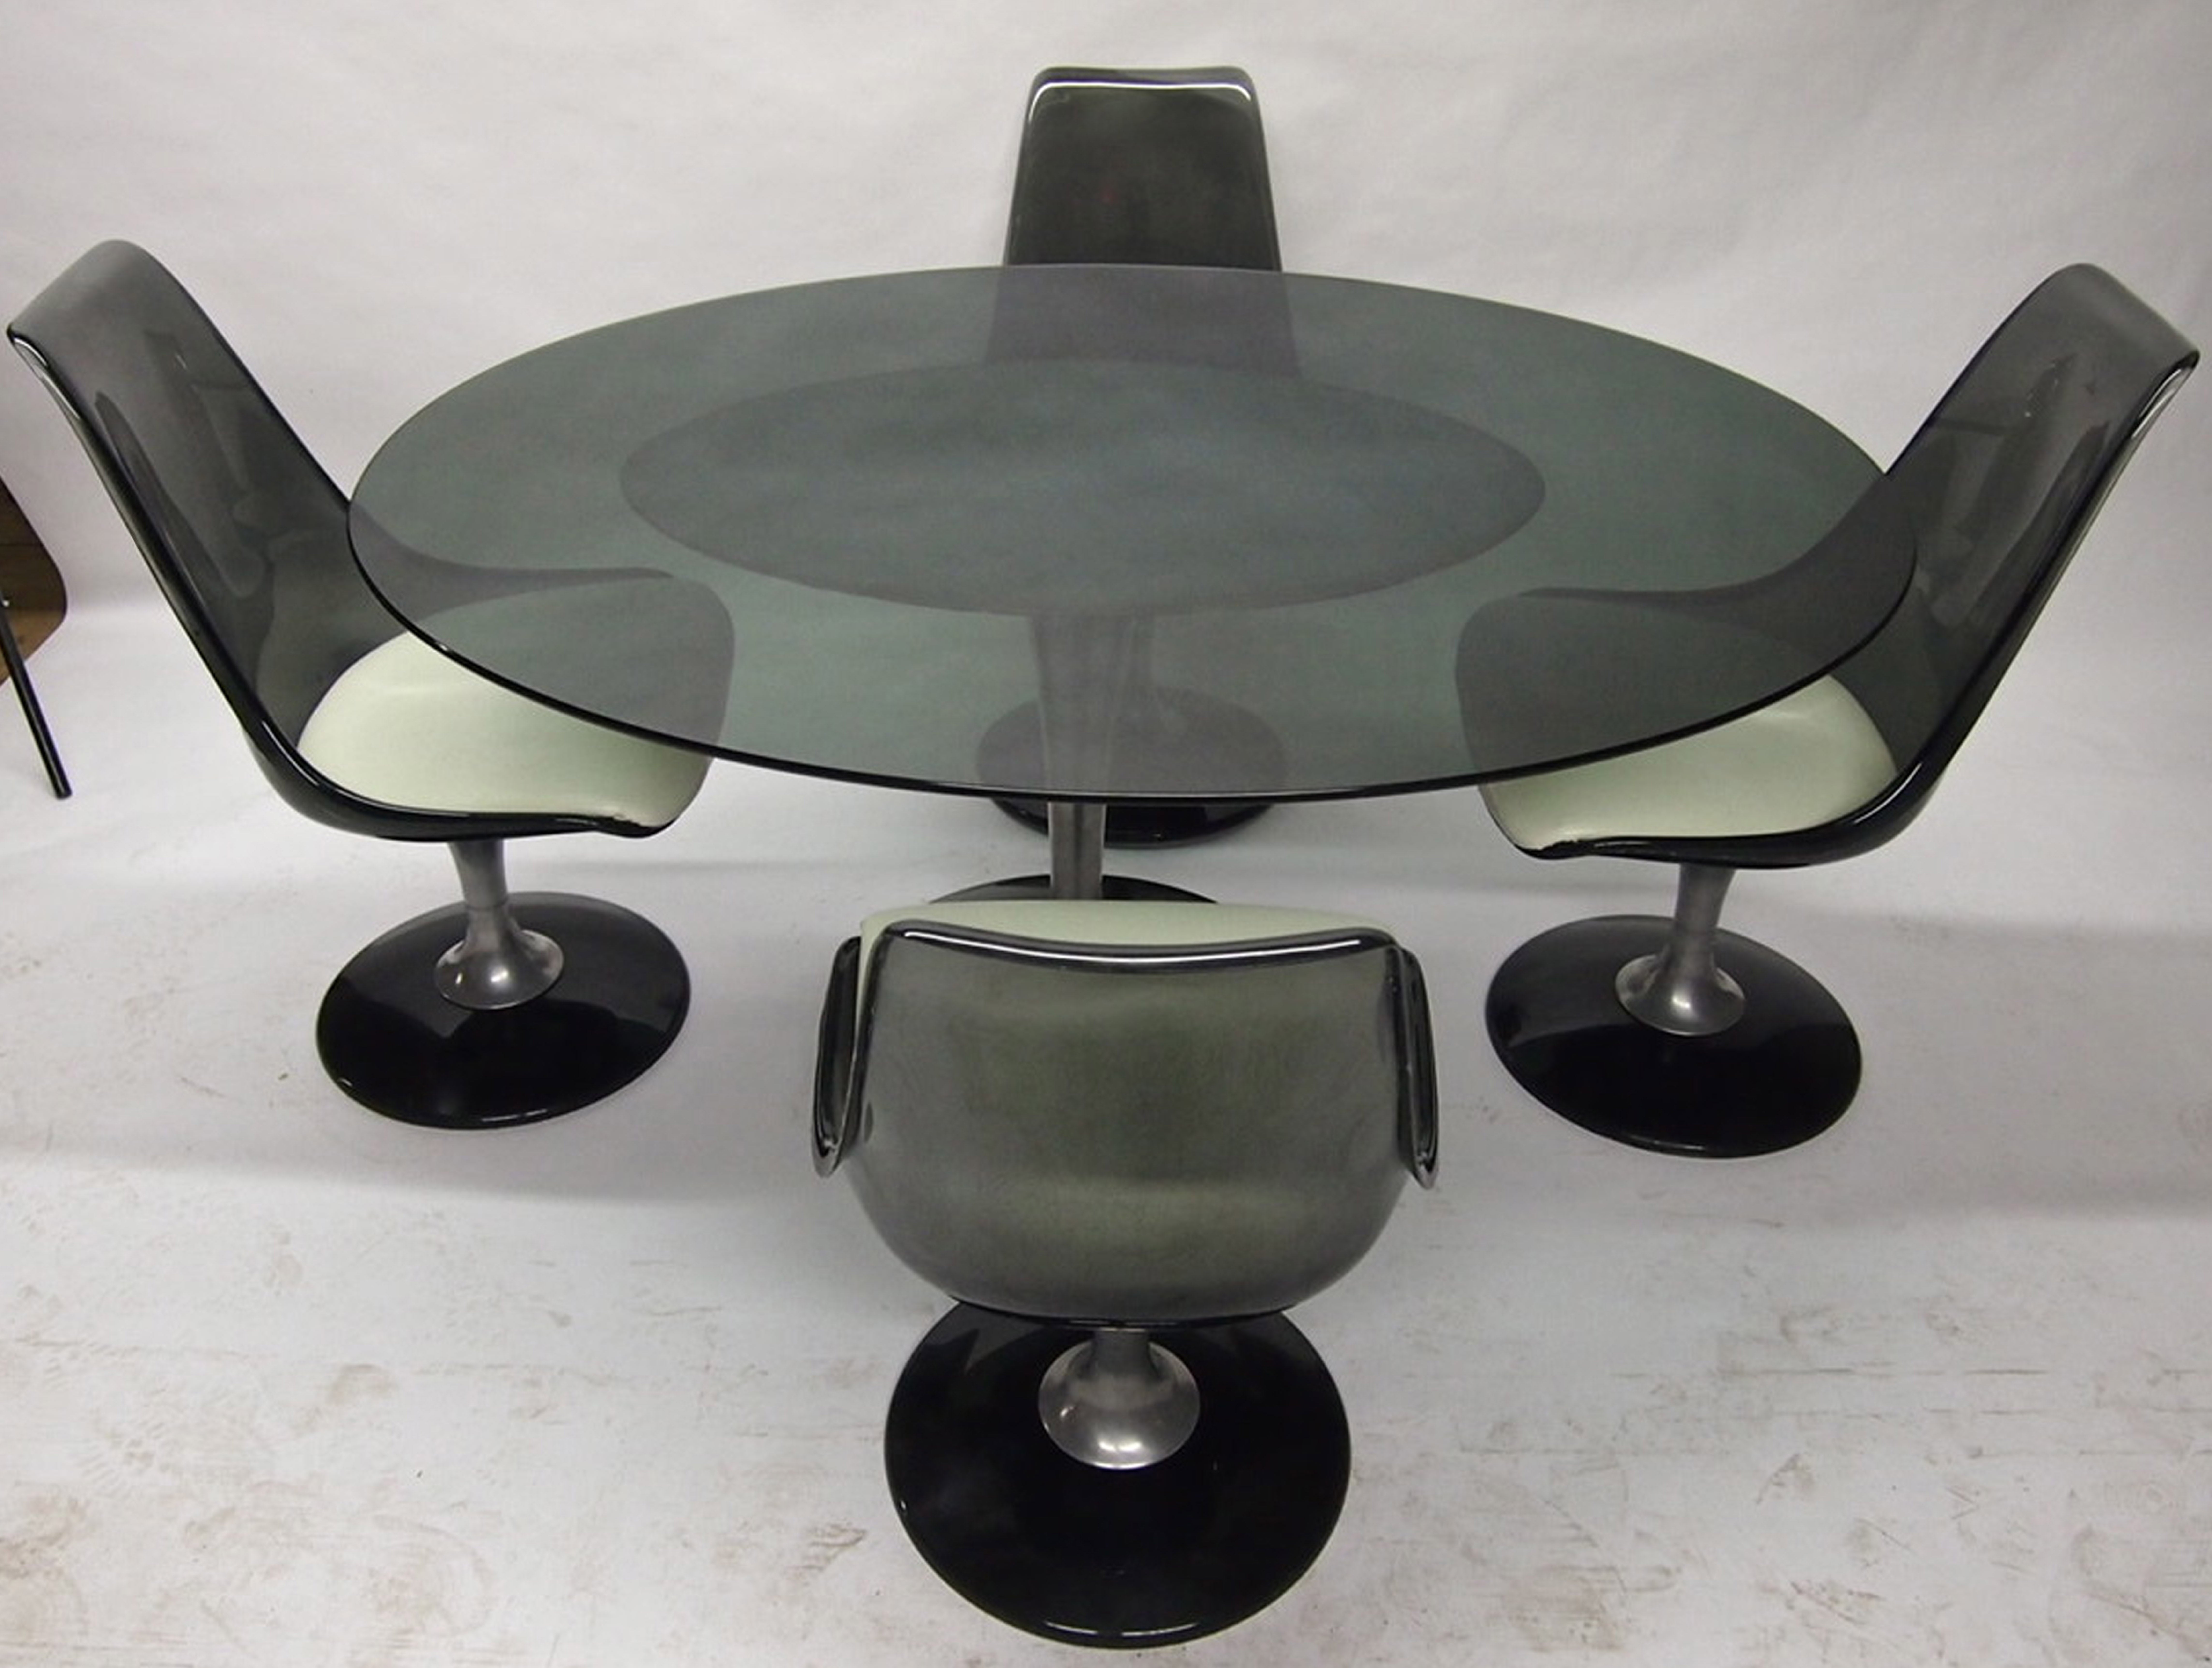 Oval Dining Set With Four Swivel Chairs by Chromcraft Circa 1970 American